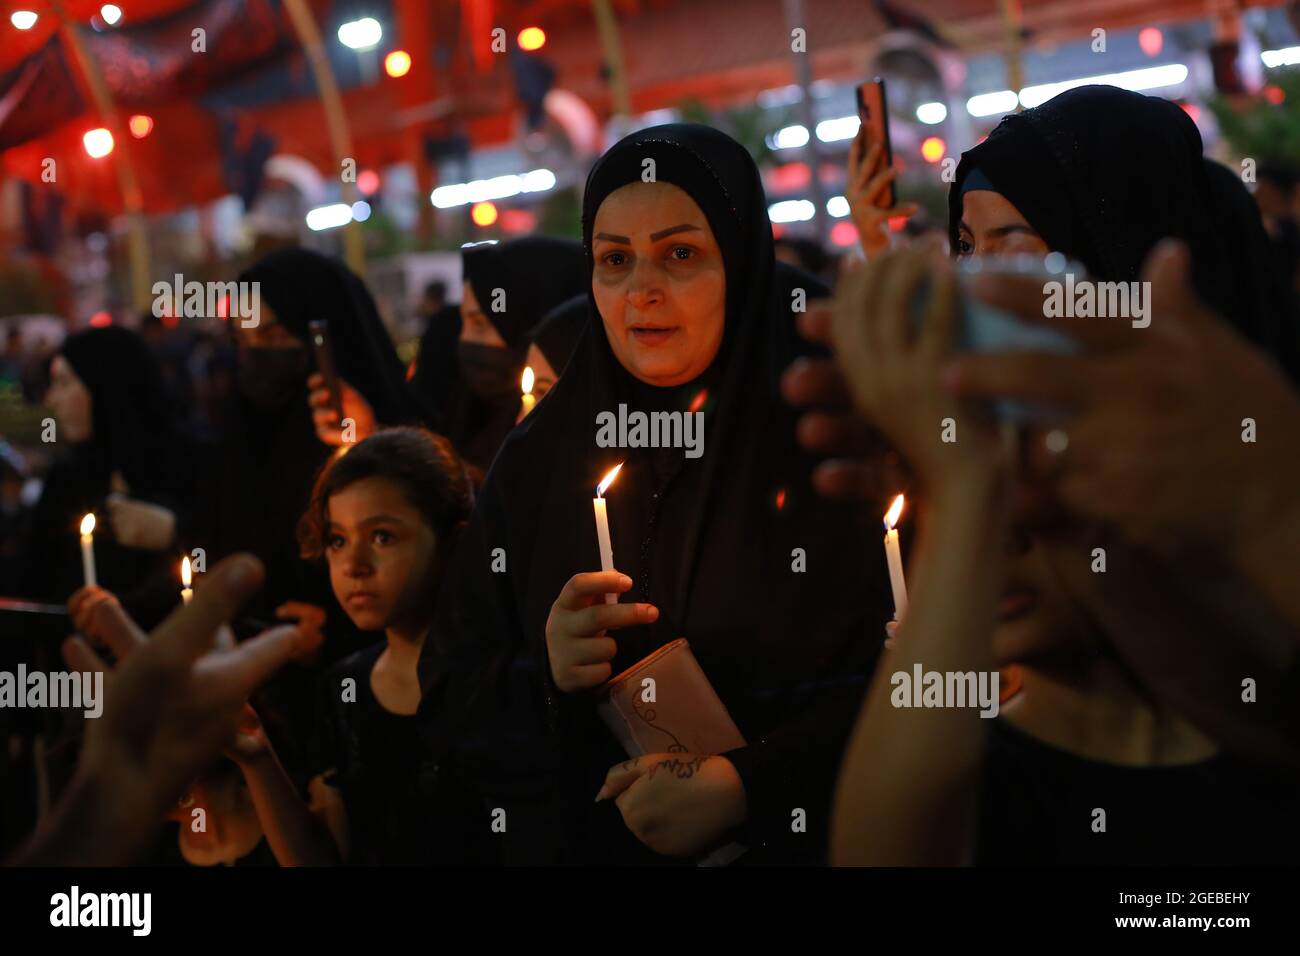 Karbala, Iraq. 18th Aug, 2021. Iraqi Shiite Muslims take part in the mourning procession on the eve of Ashura Day, held on the 9th day of the month of Muharram, the first month of the Islamic calendar, at the Imam Abbas shrine in Iraq's holy city of Karbala. Muharram is considered a month of mourning and remembrance for Shiite Muslims around the world, in which they commemorate the martyrdom of the grandson of the Islamic prophet Mohammad, Husayn ibn Ali, who was killed in the 7th century Battle of Karbala. Credit: Ameer Al Mohammedaw/dpa/Alamy Live News Stock Photo